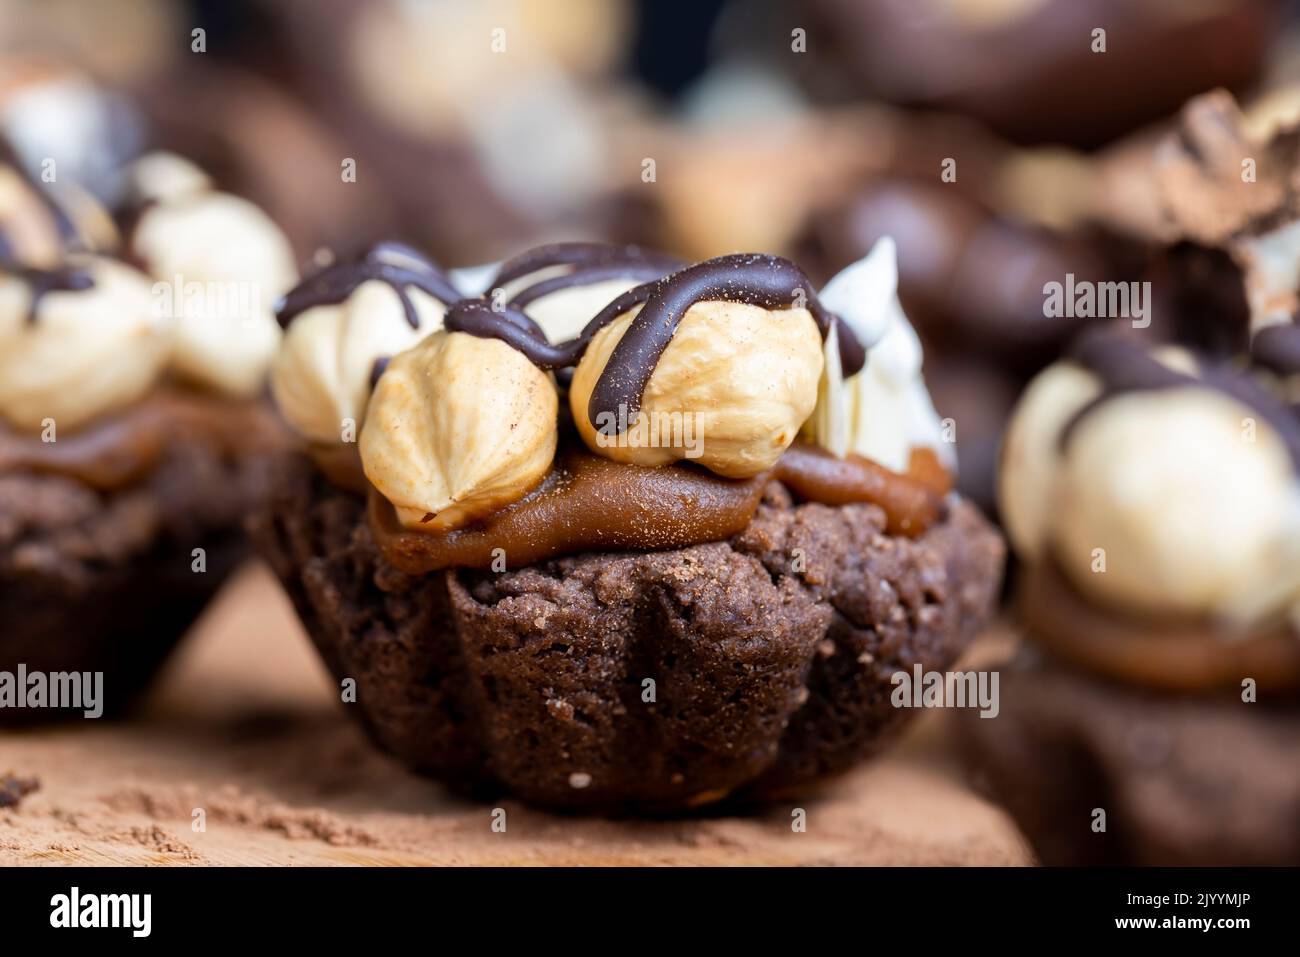 multicomponent cake made of caramel and nuts in chocolate, mixed hazelnut cake with almonds and caramel Stock Photo